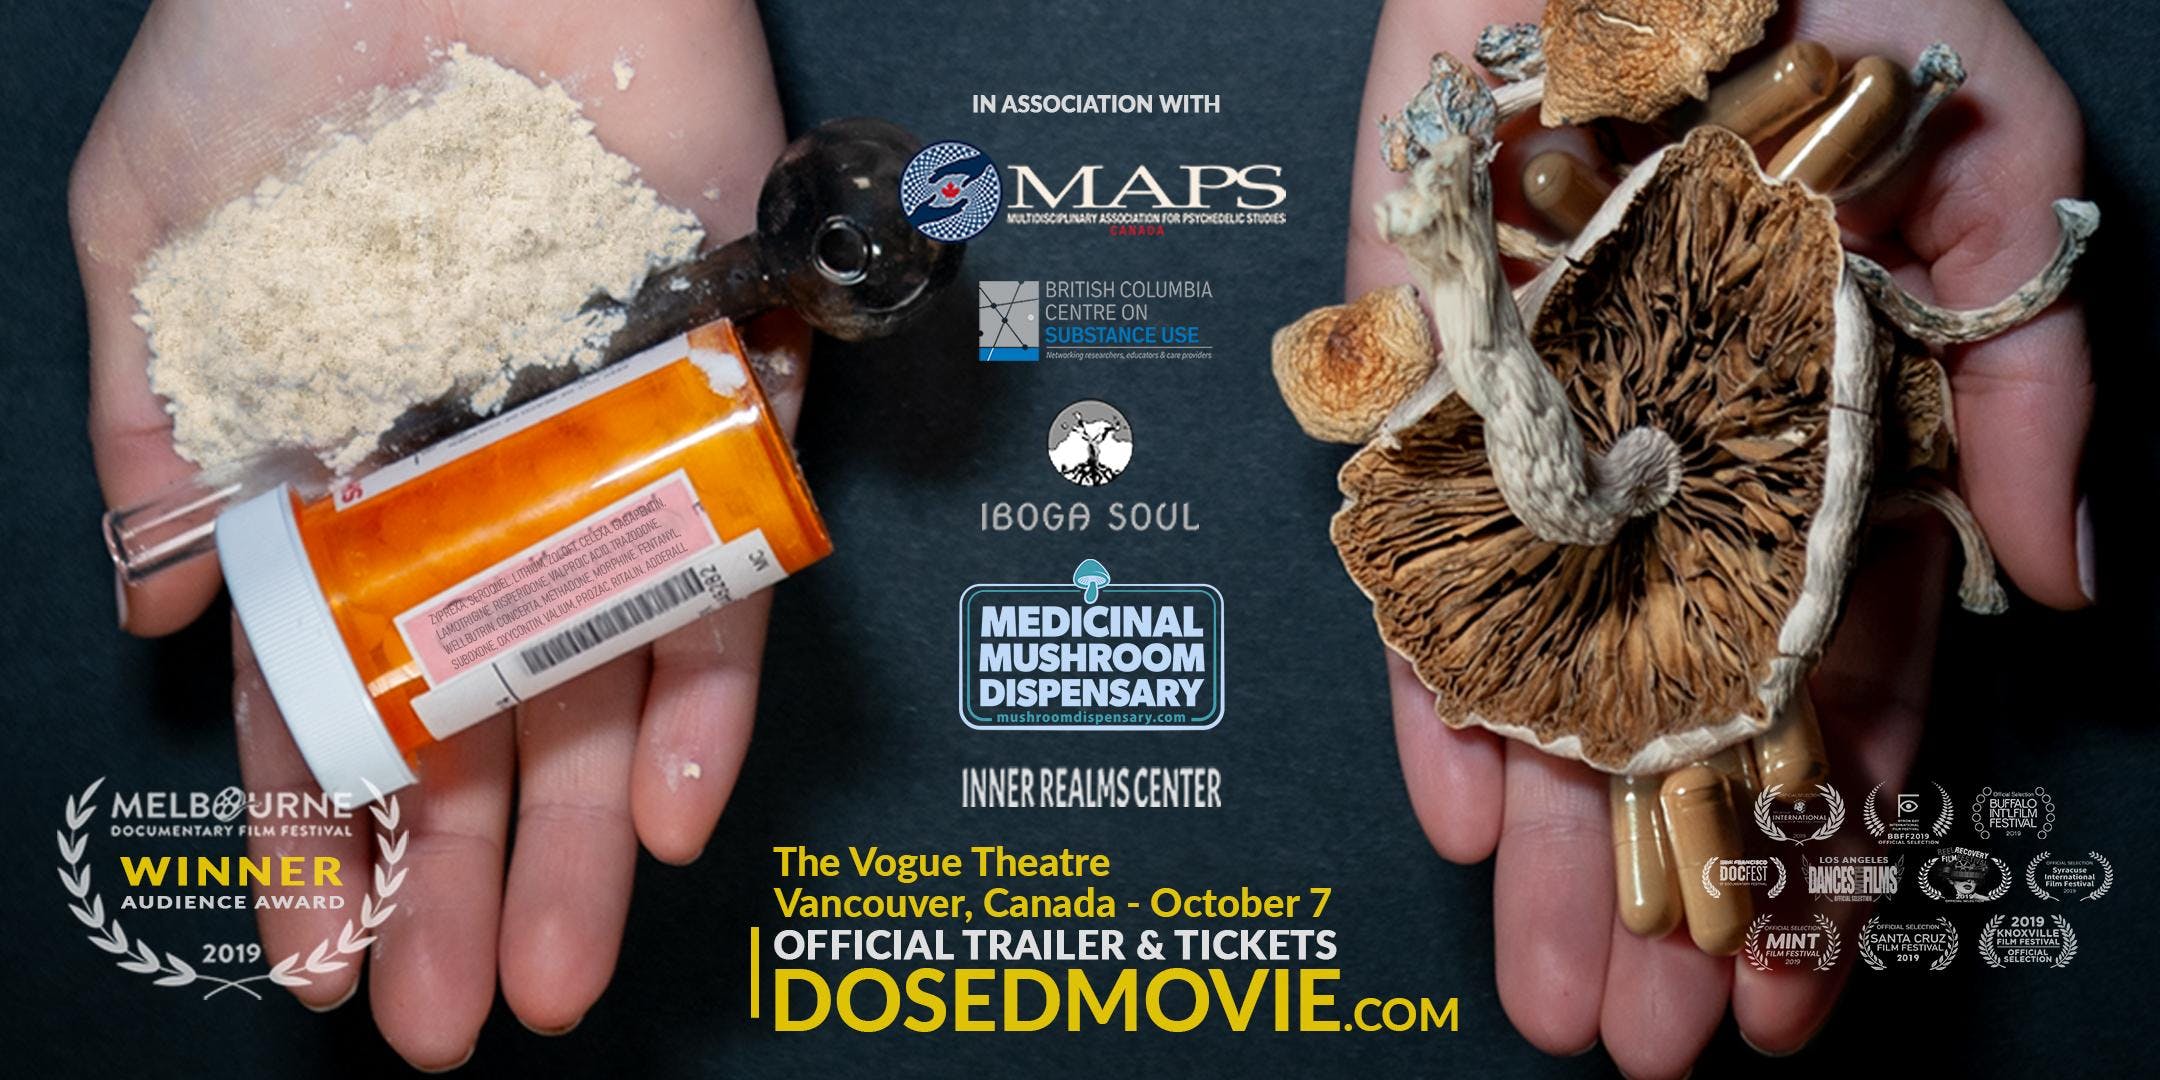 DOSED documentary + M.A.P.S. Fundraiser